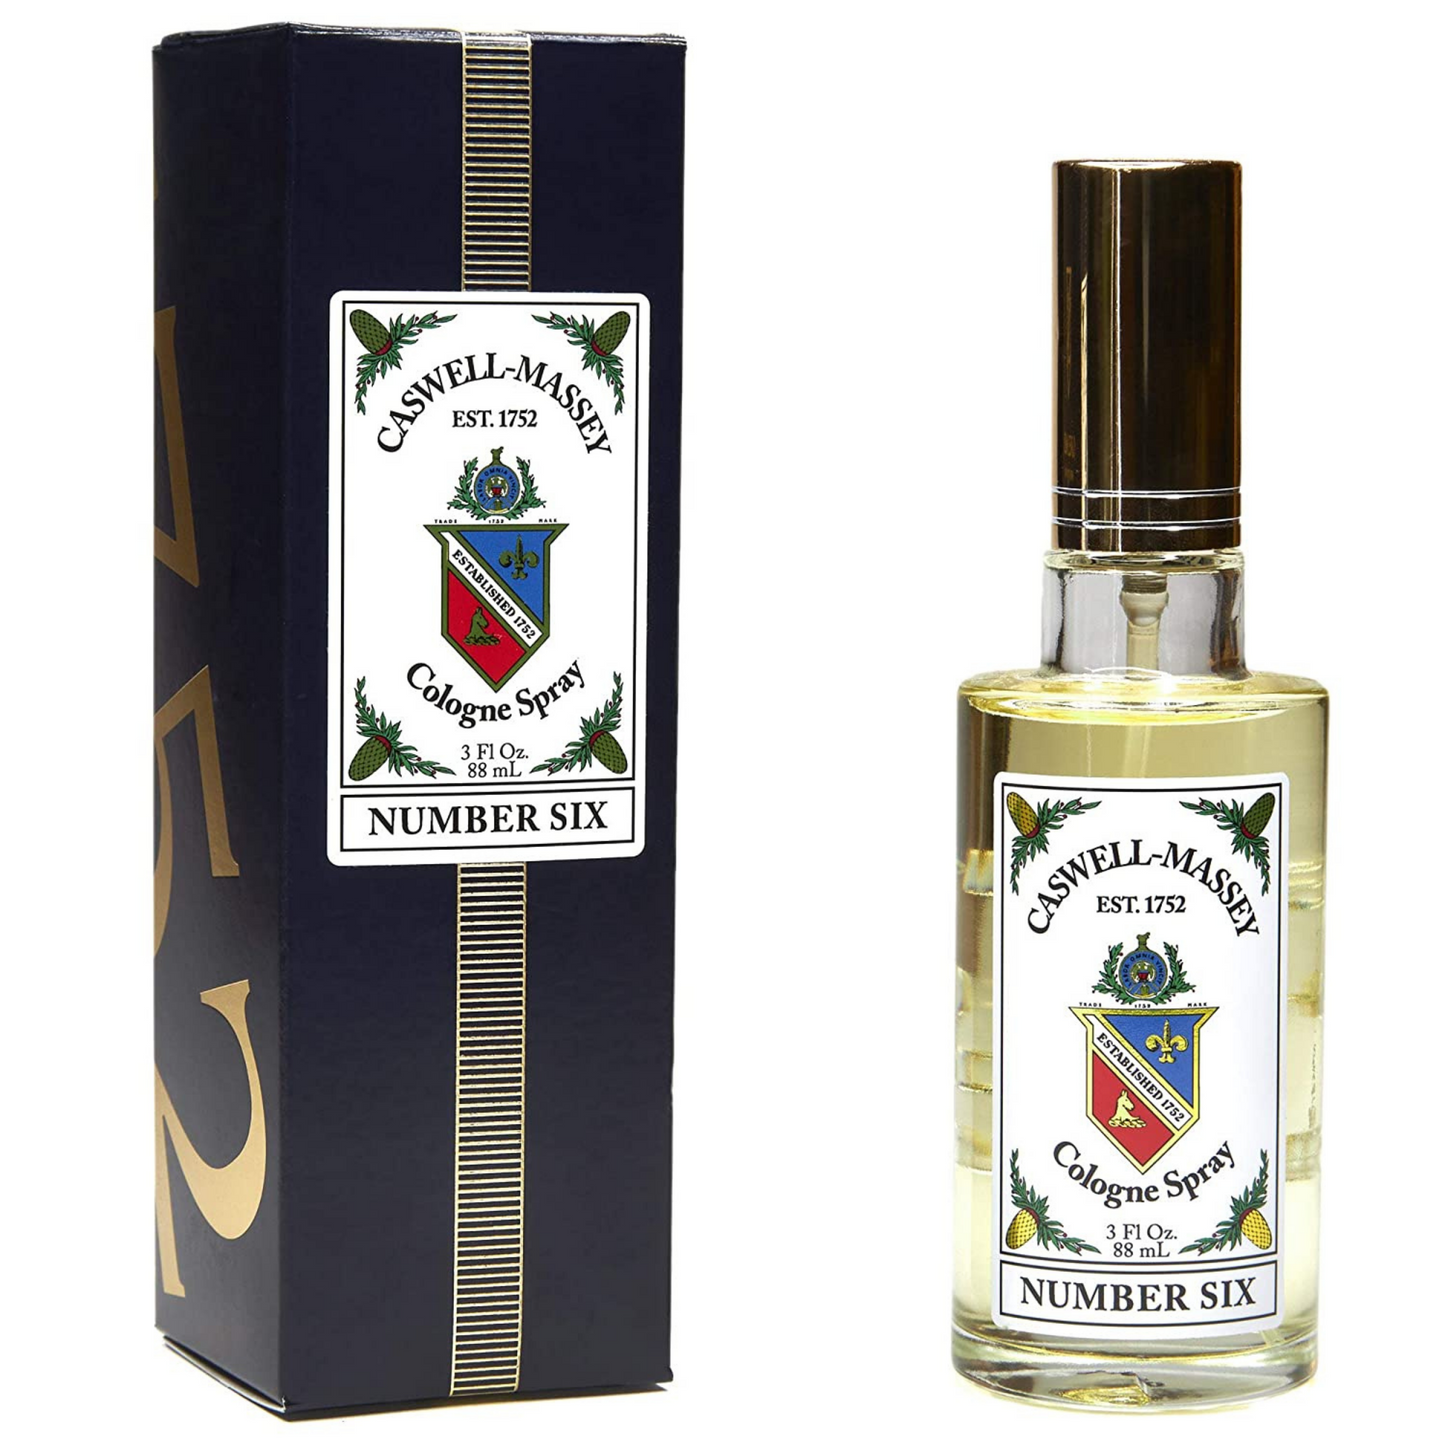 Primary image of Gold Cap Number Six Cologne Spray